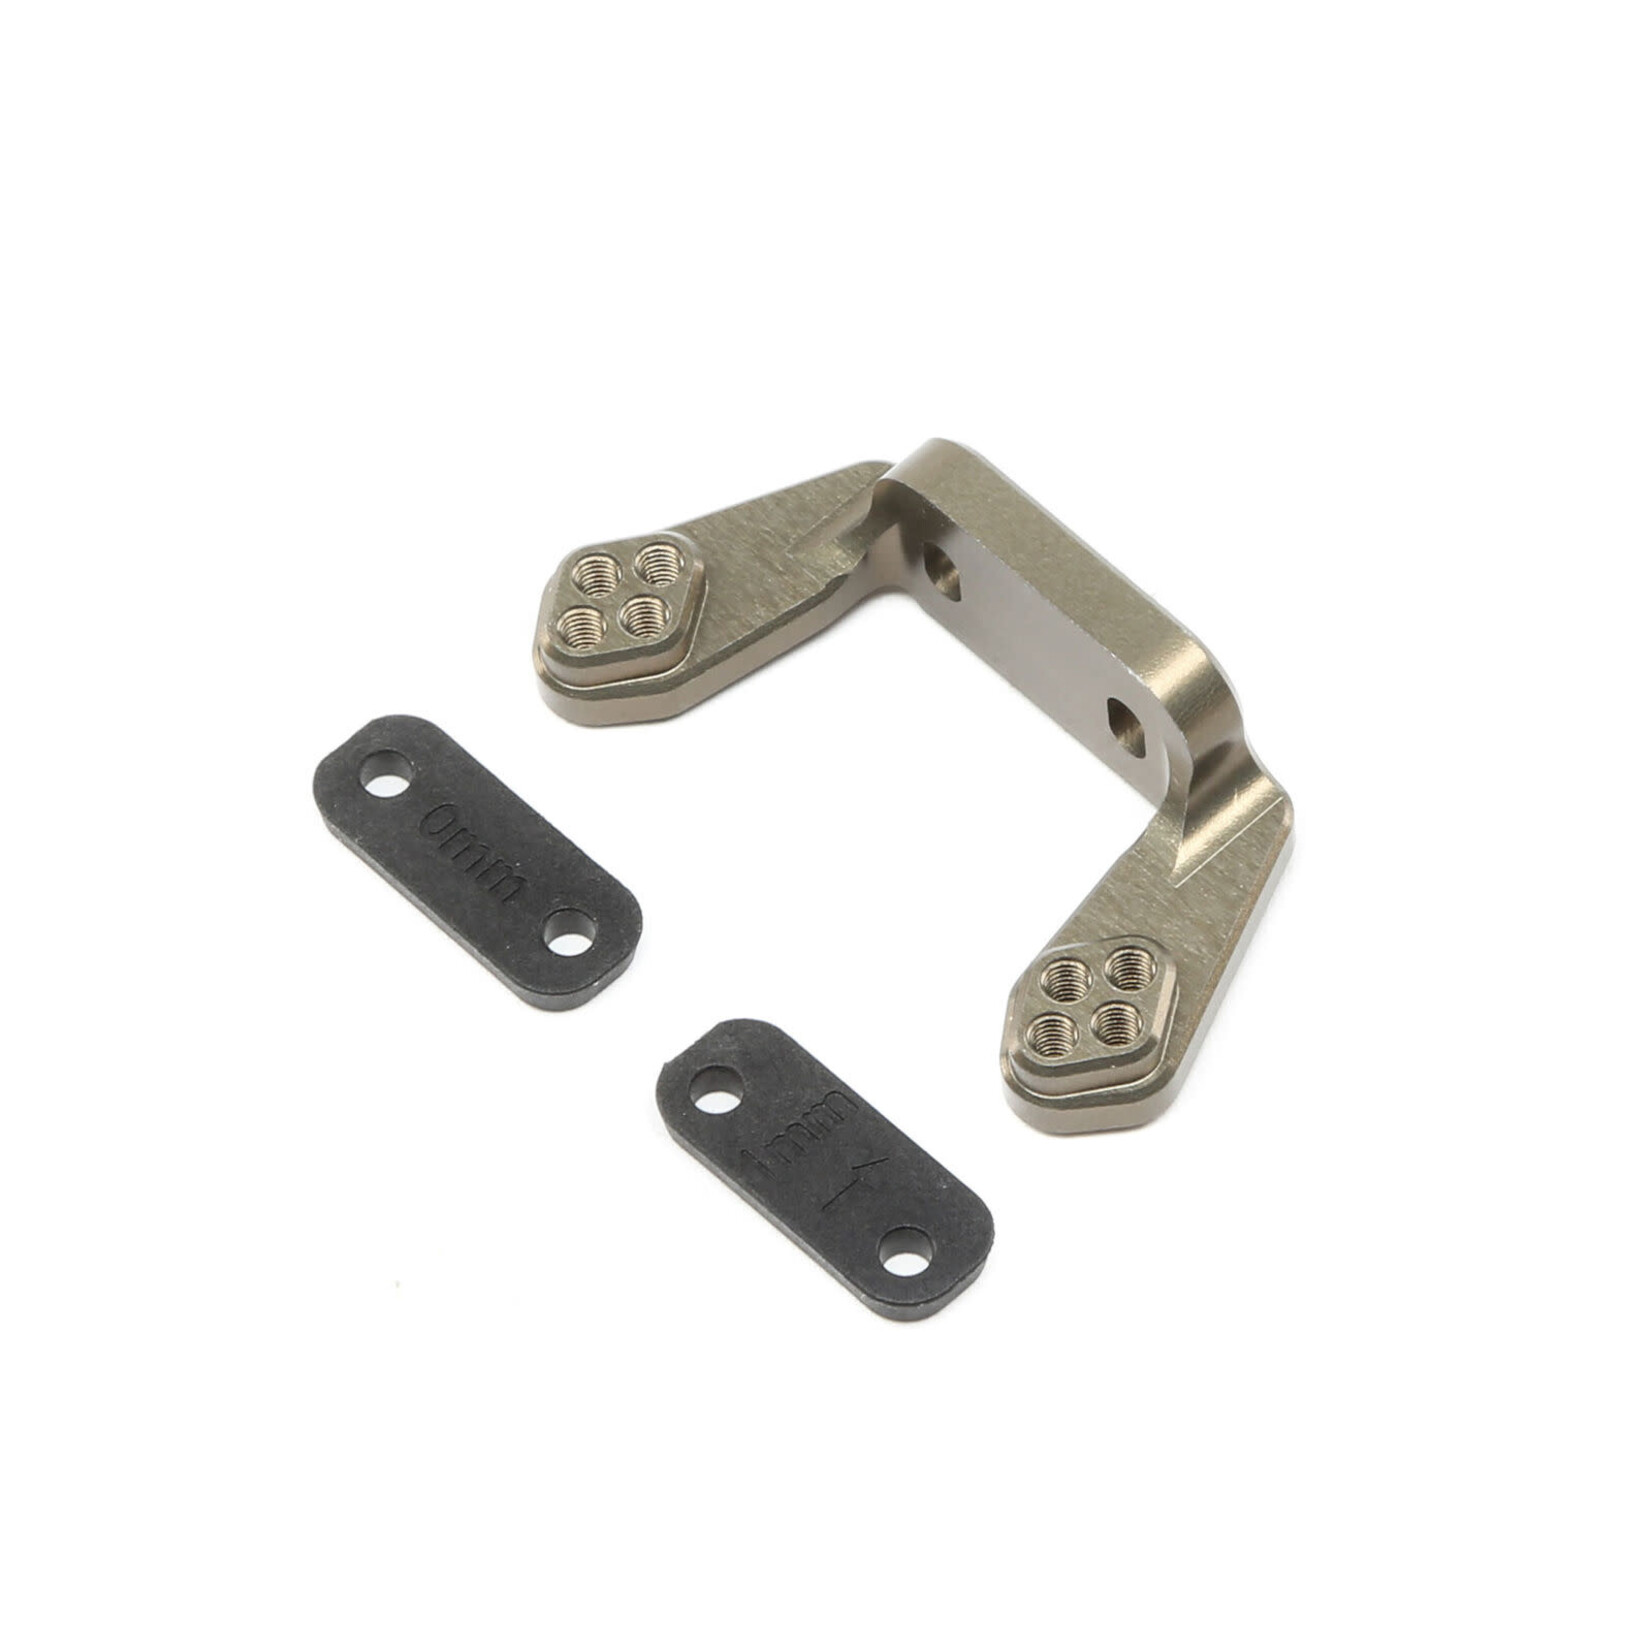 TLR TLR234057 TLR Rear Camber Block with Inserts: 22 3.0, 4.0, 5.0